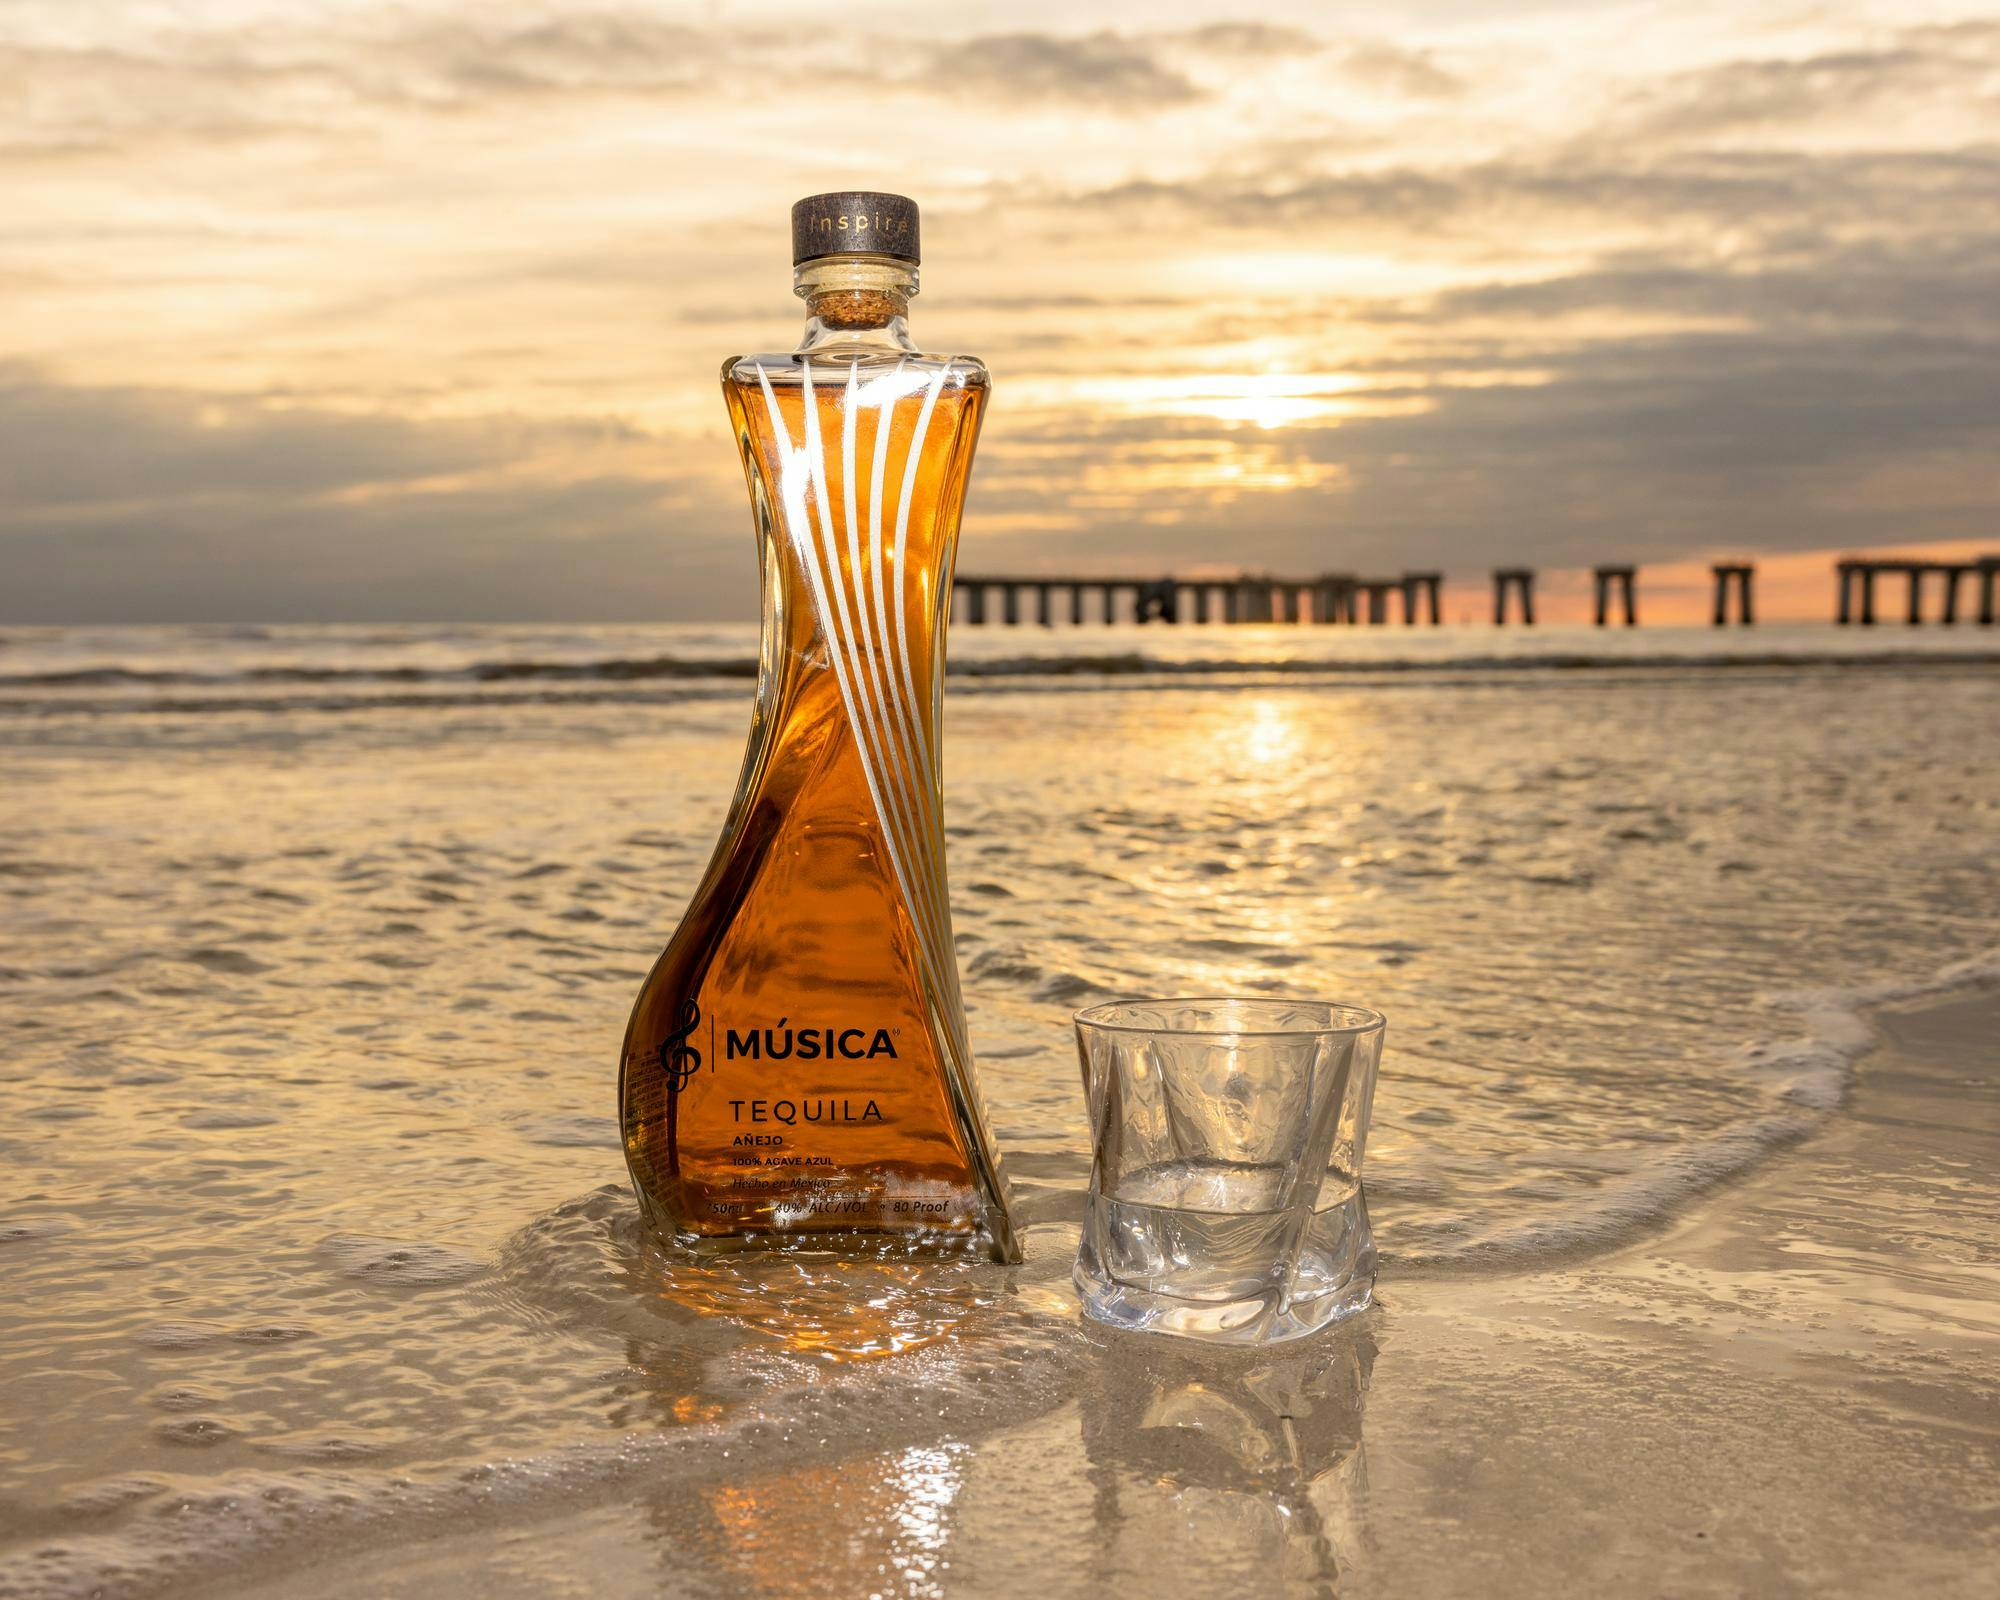 The Música Tequila bottle, inspired by the founders' love of music. Photo courtesy of Chris Andrews. 